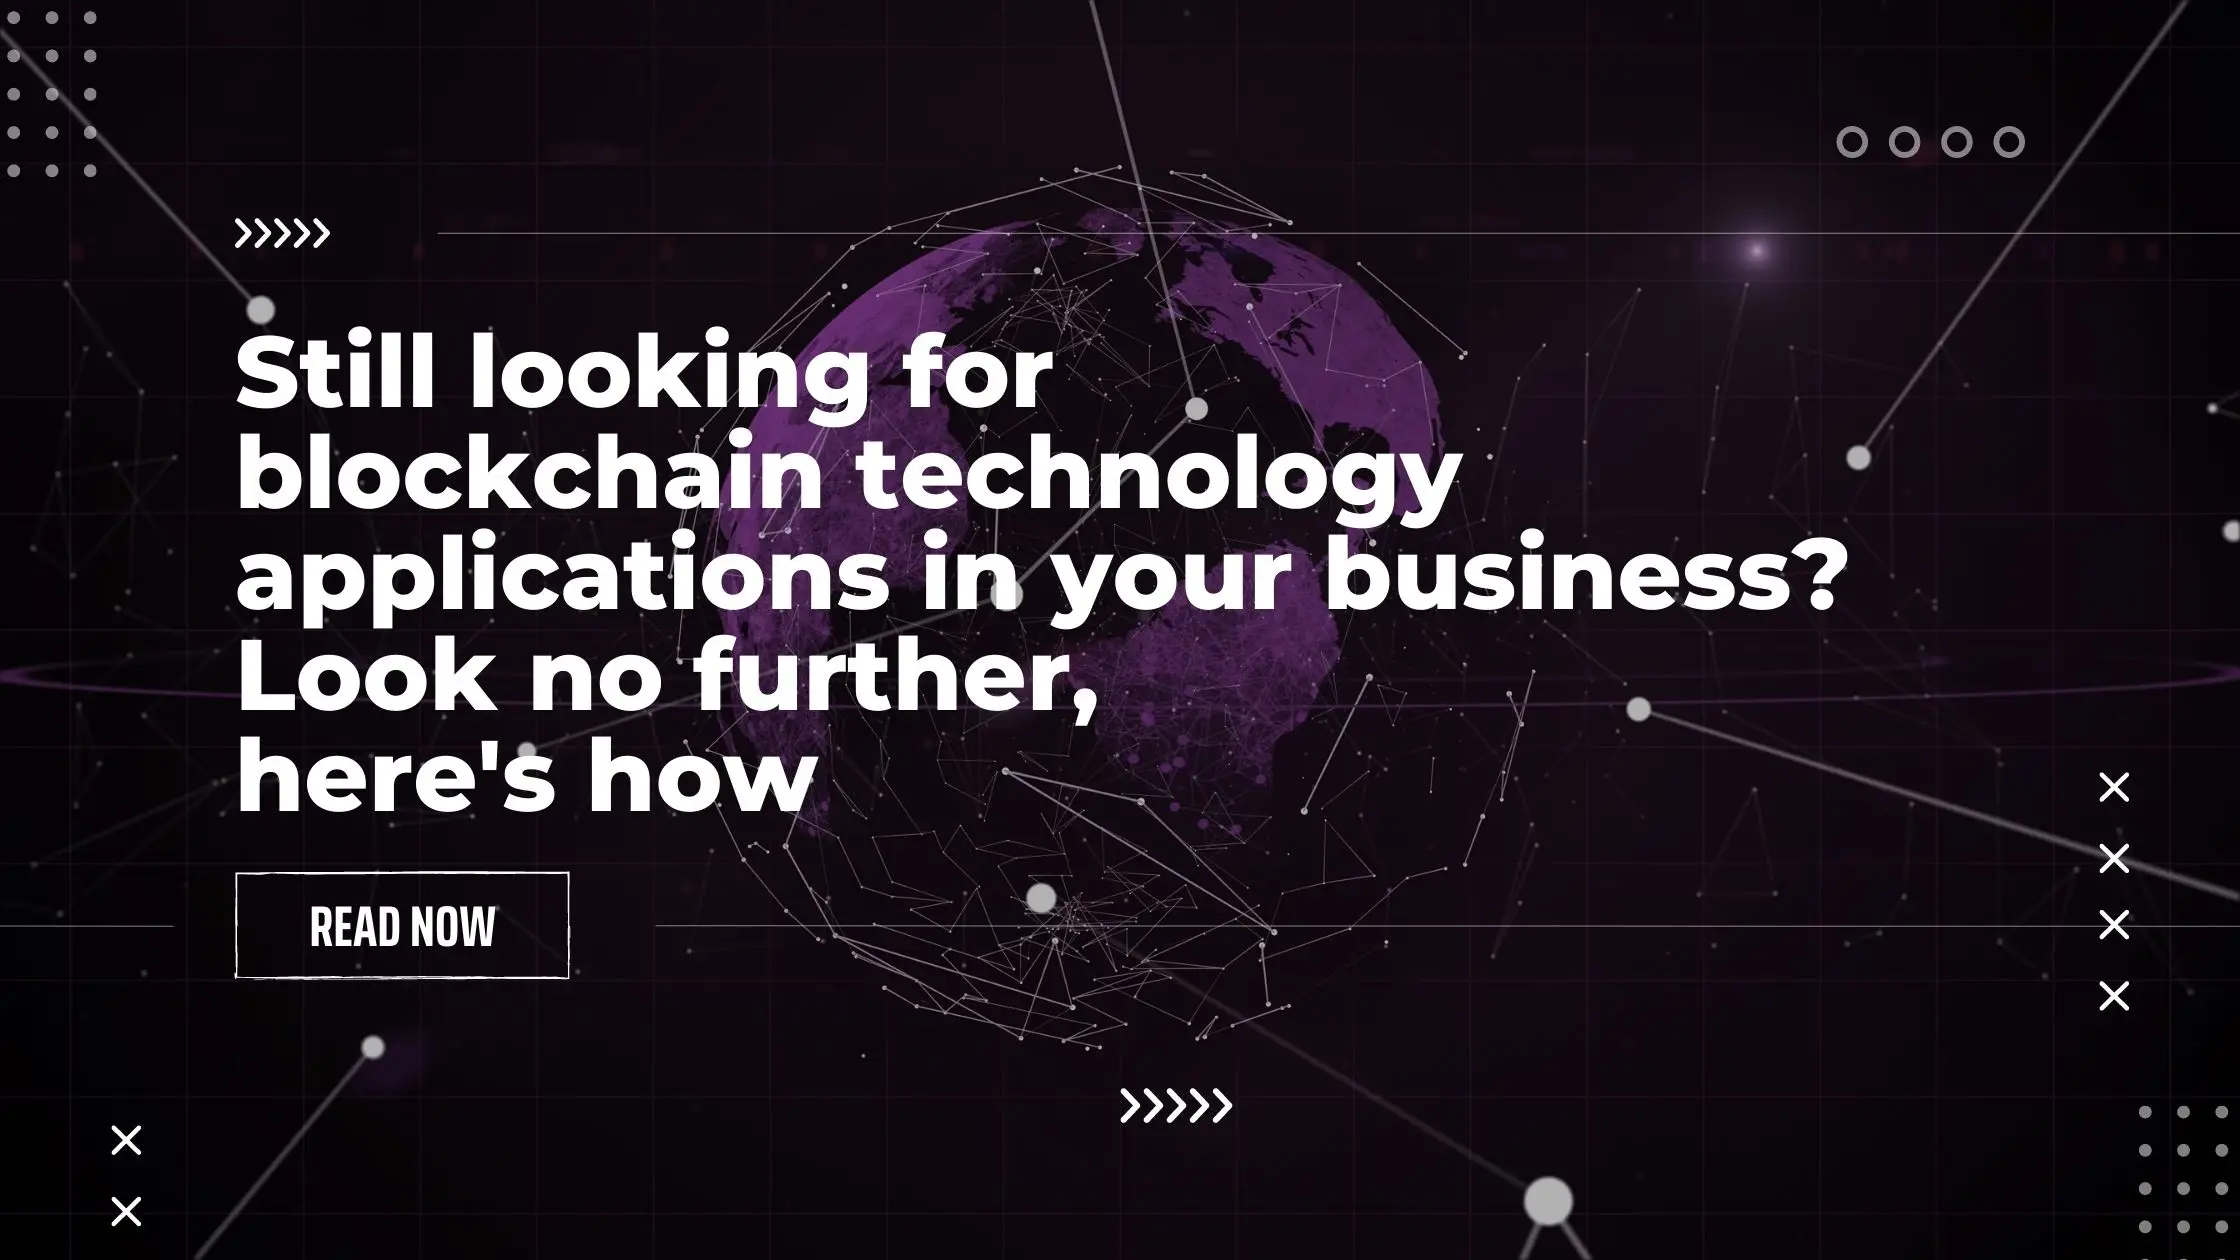 Still looking for blockchain technology applications in your business? Look no further, here’s how